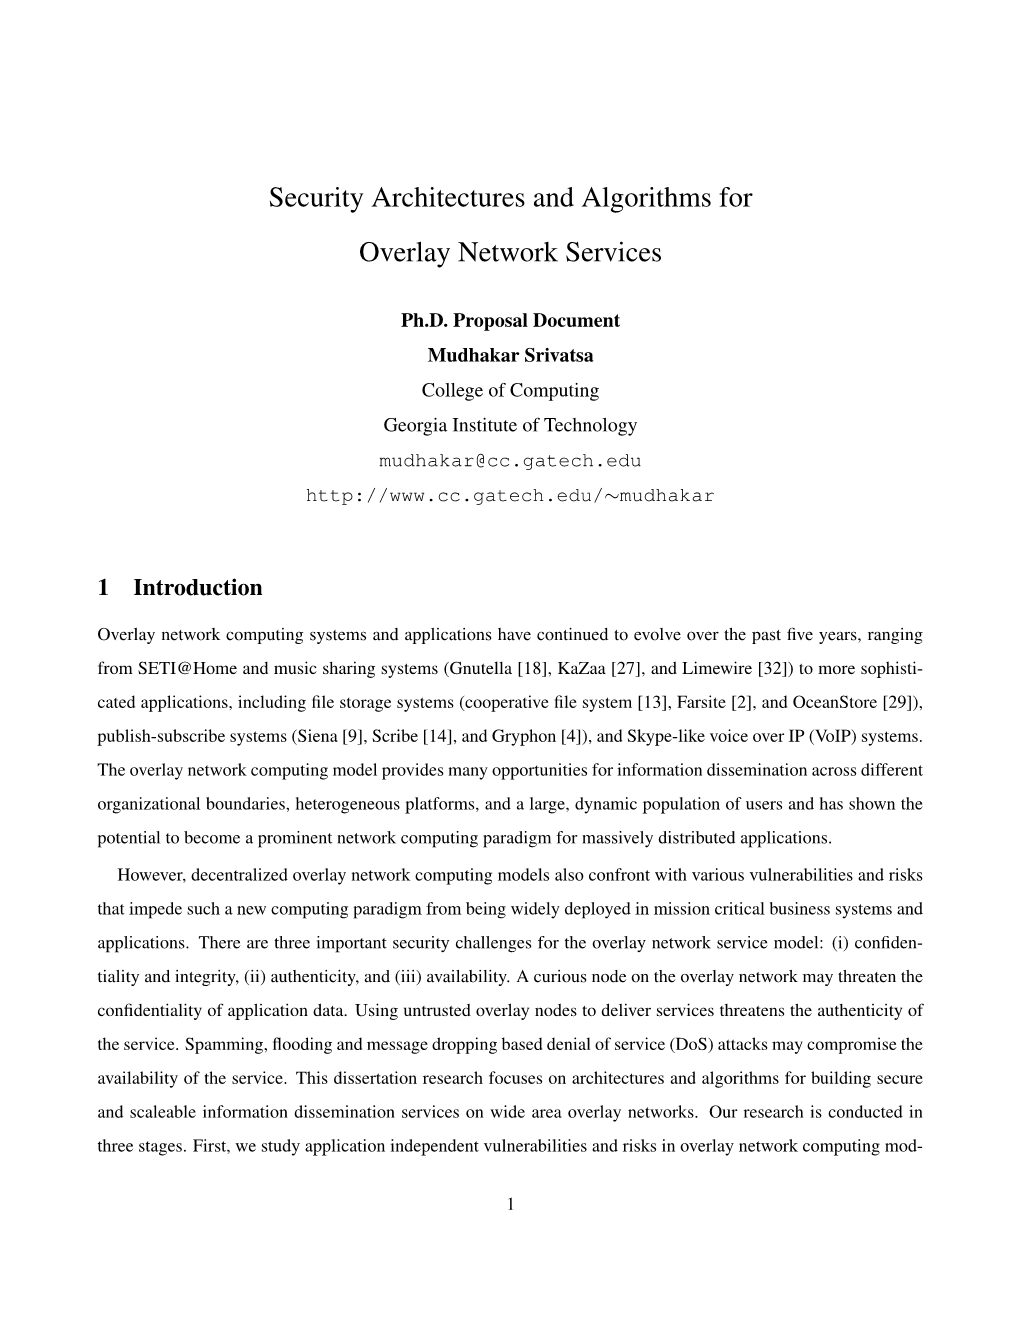 Security Architectures and Algorithms for Overlay Network Services